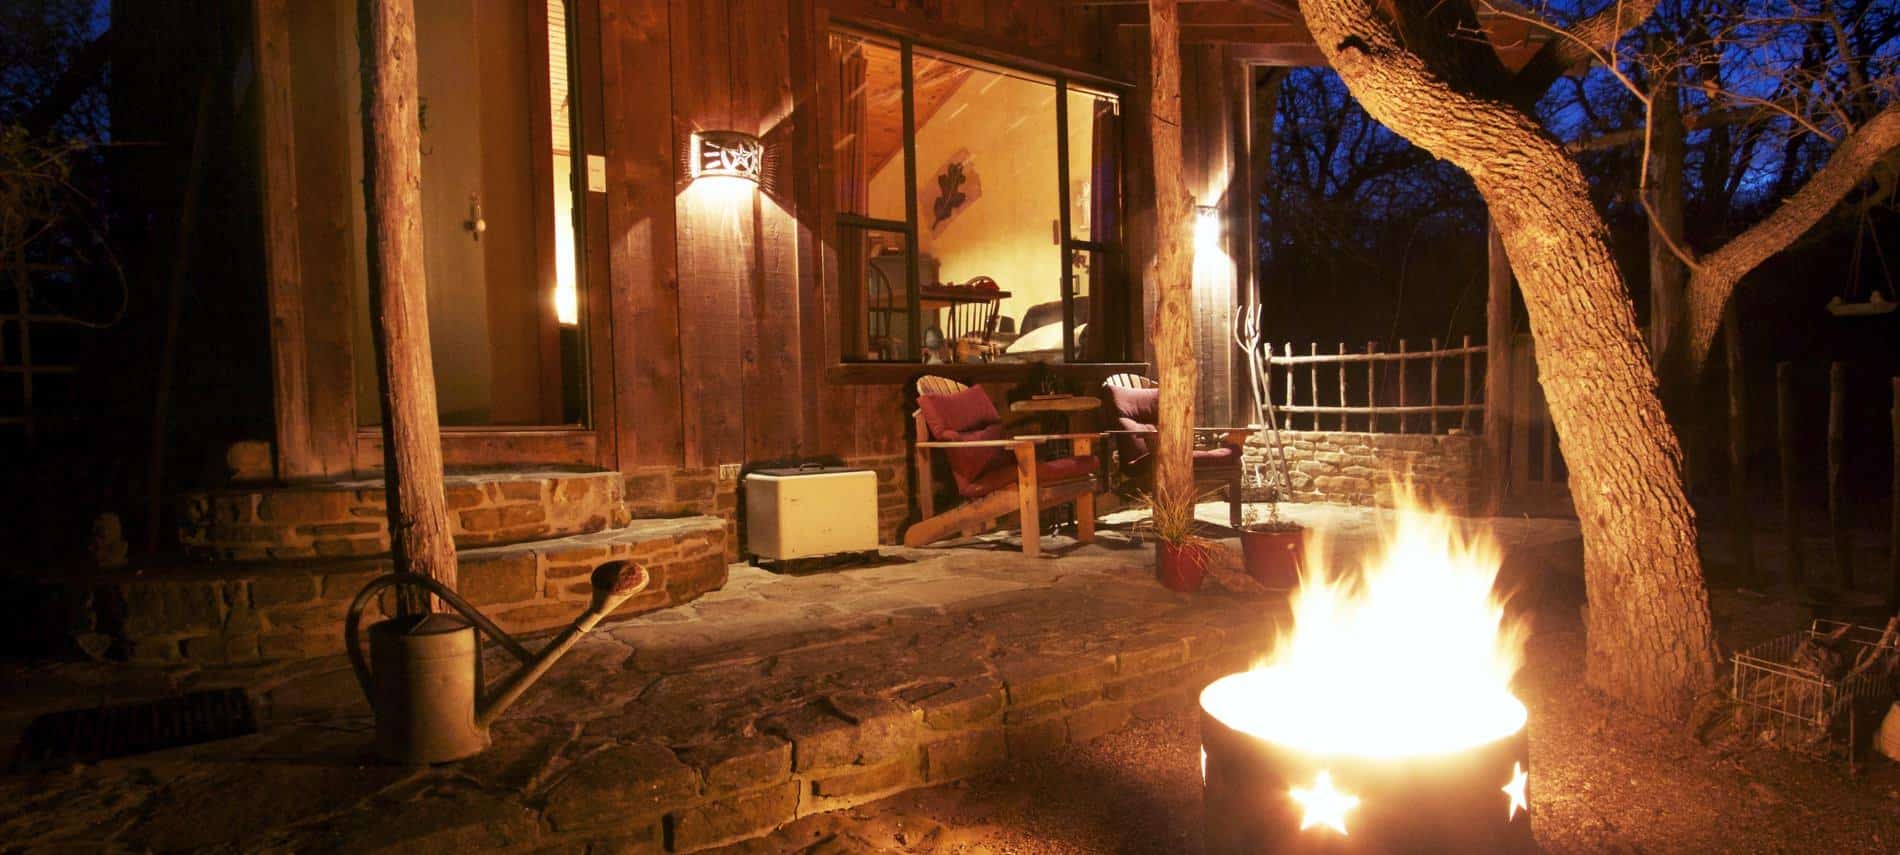 Cozy campfire and night outside one of the rustic cabins